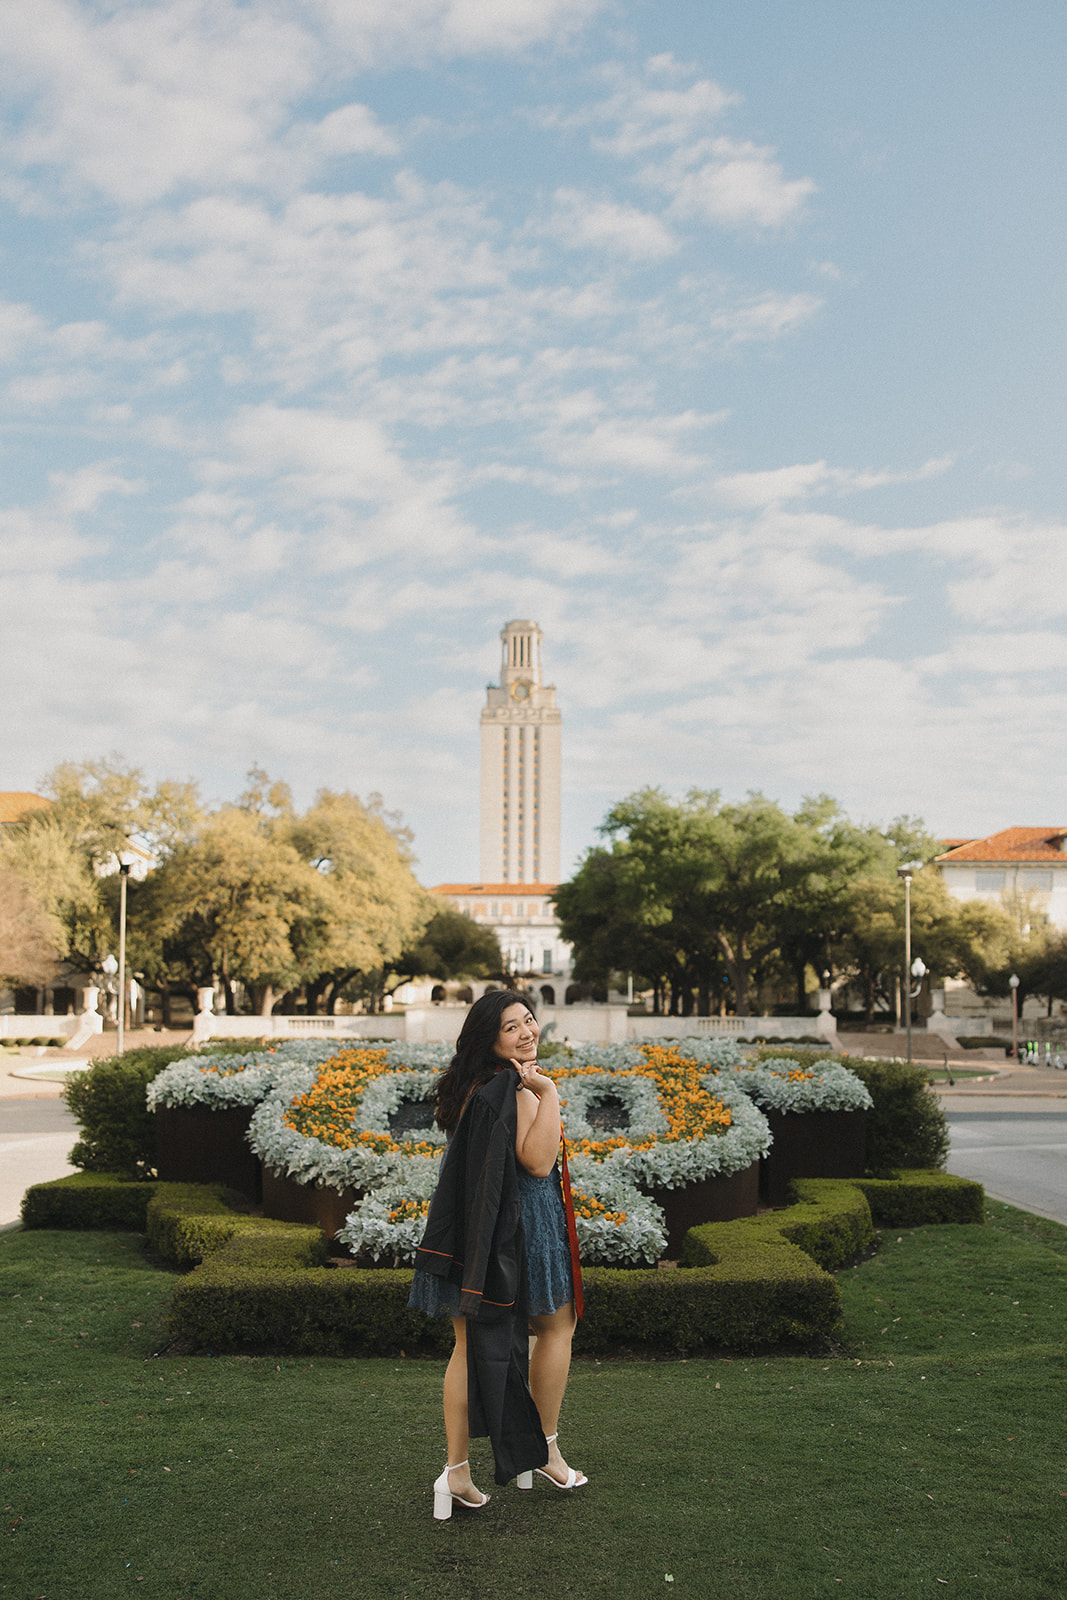 UT Austin senior pictures on the lawn with cap and gown